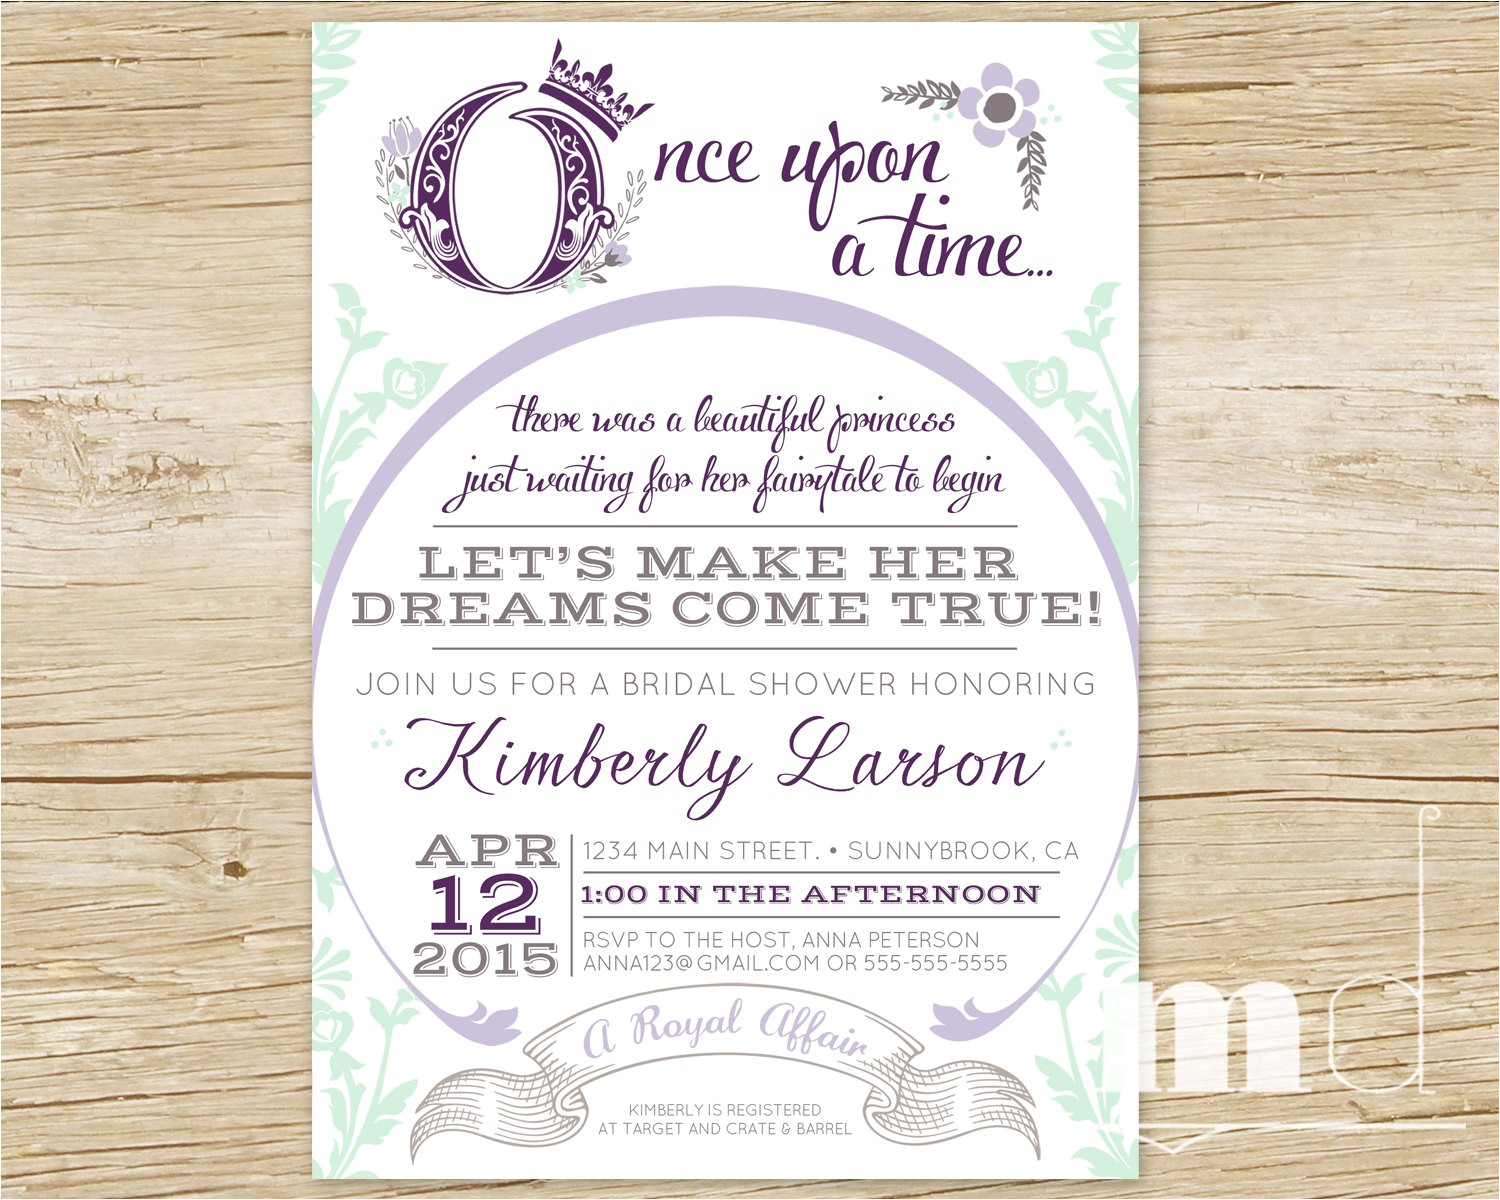 once upon a time bridal shower